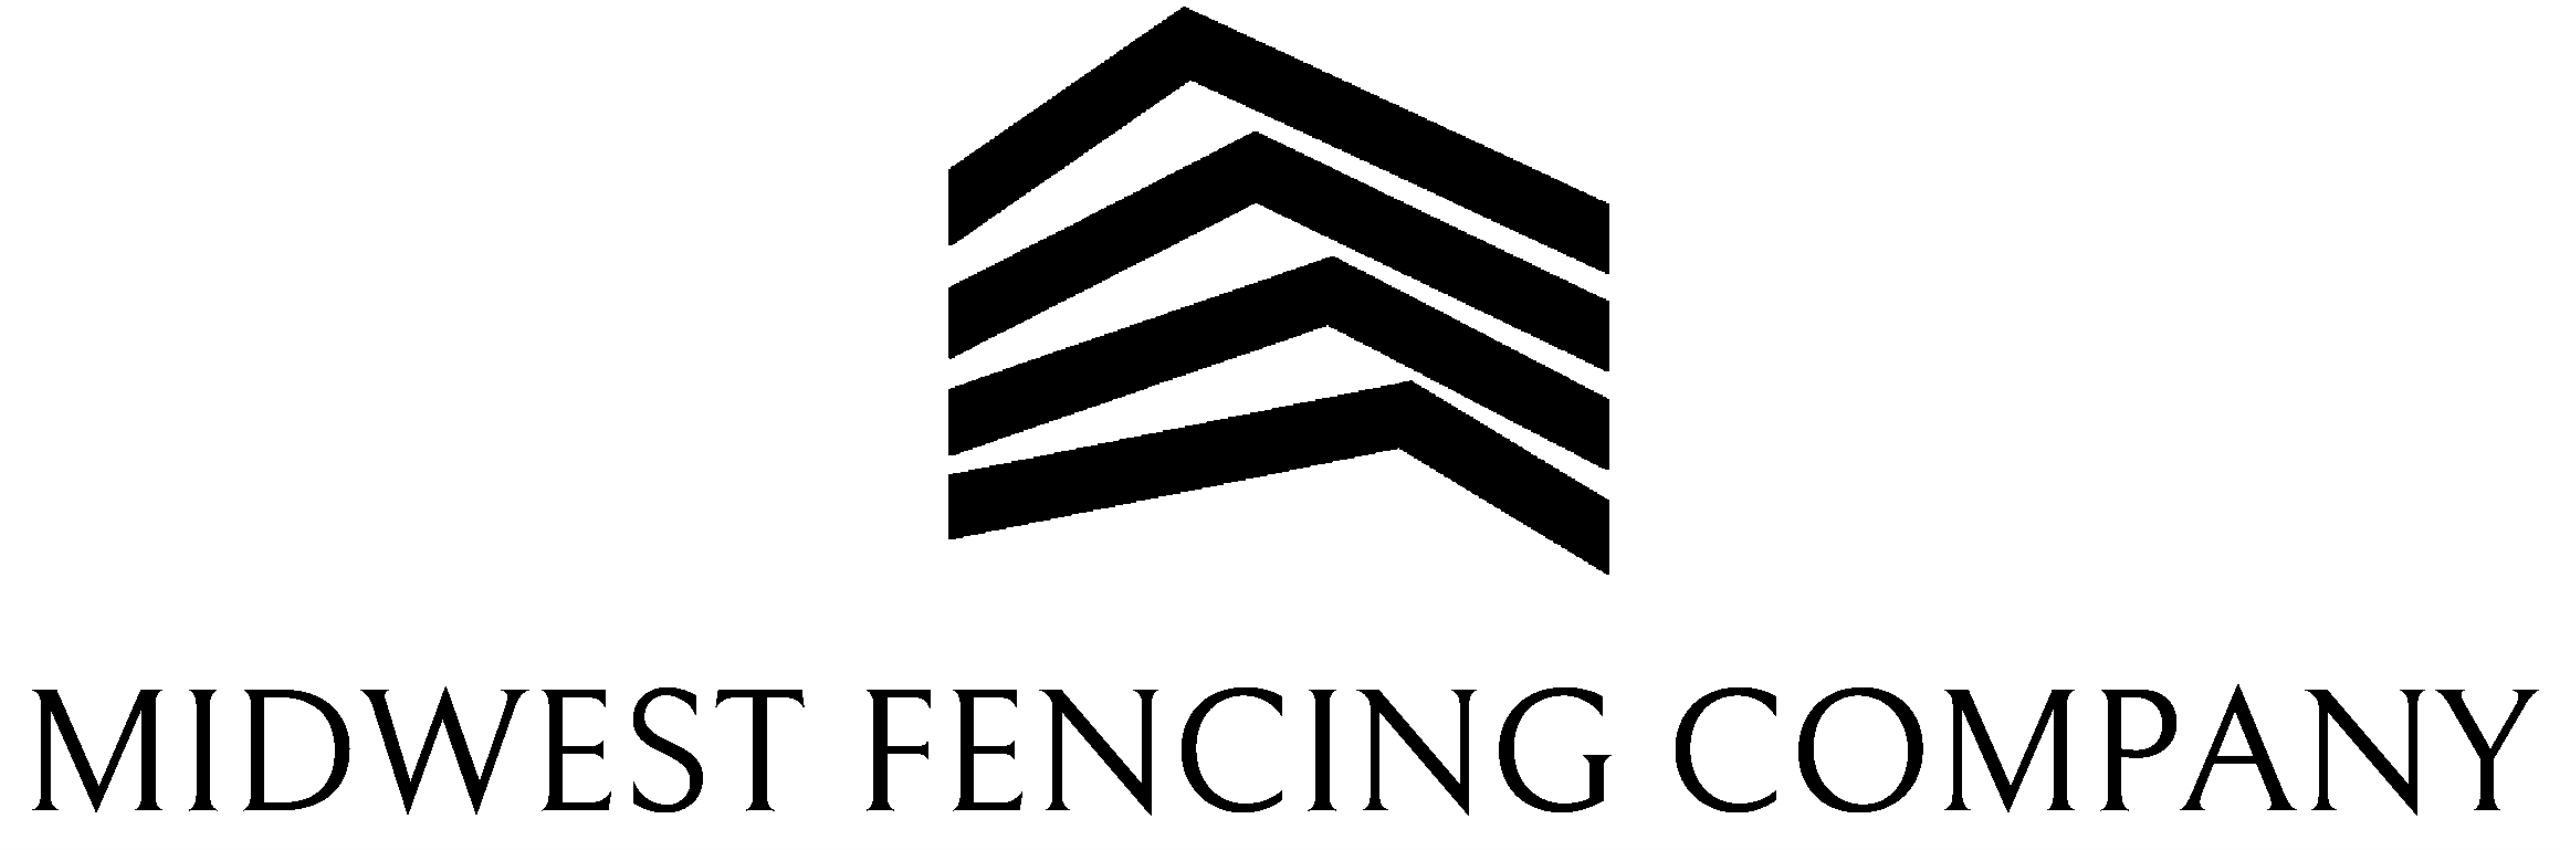 Midwest Fencing Company Logo